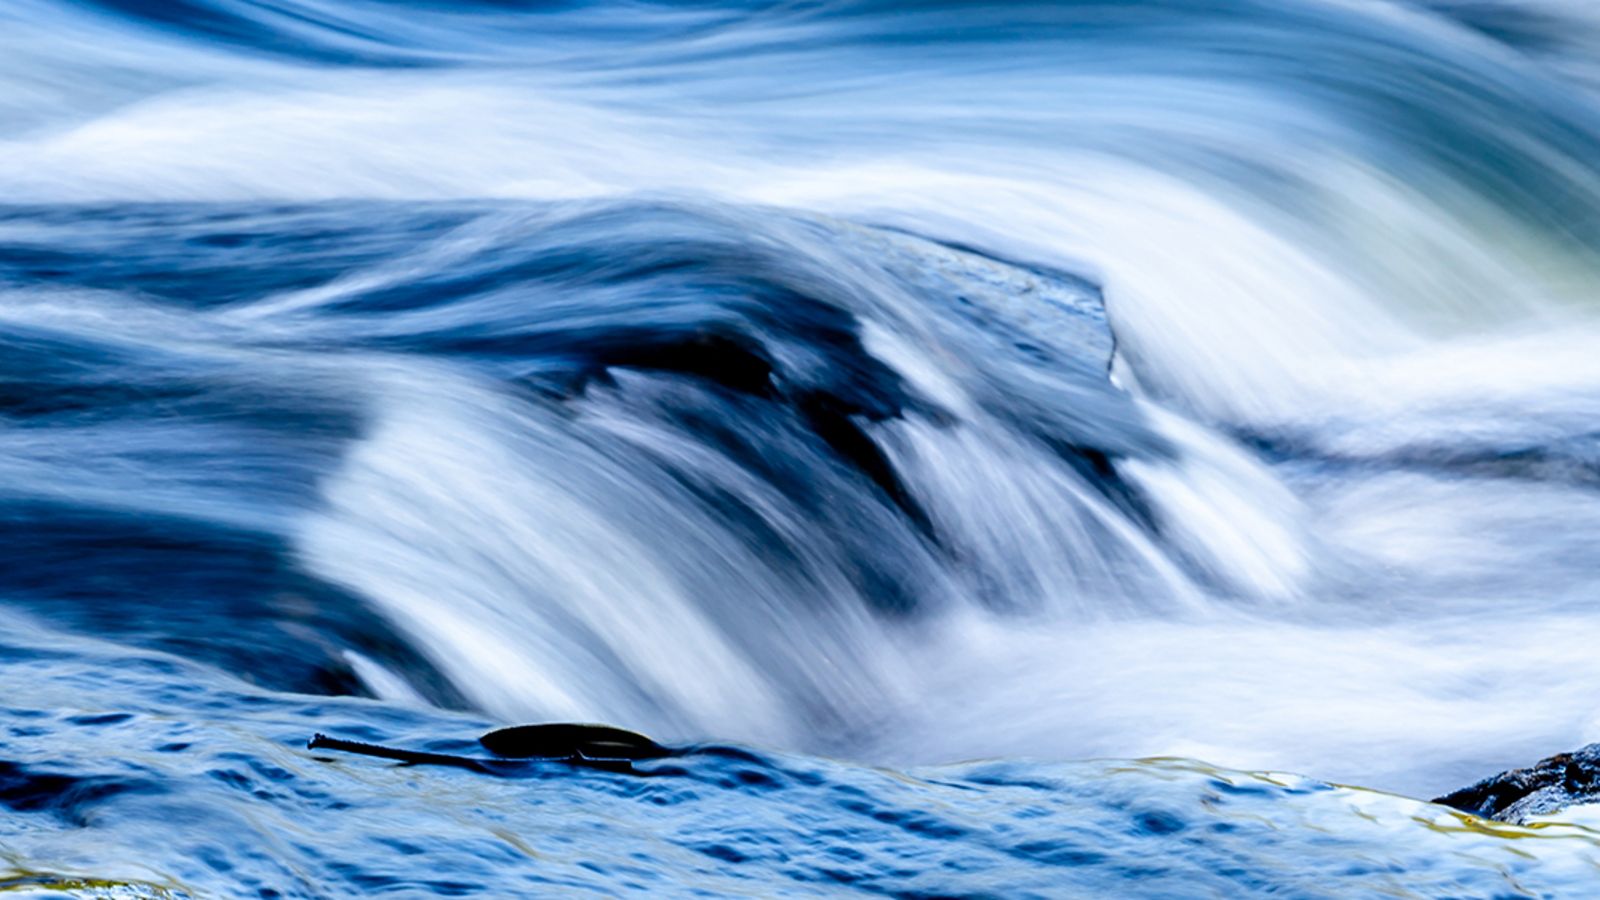 Blue water rushing over rocks with stick floating in foreground